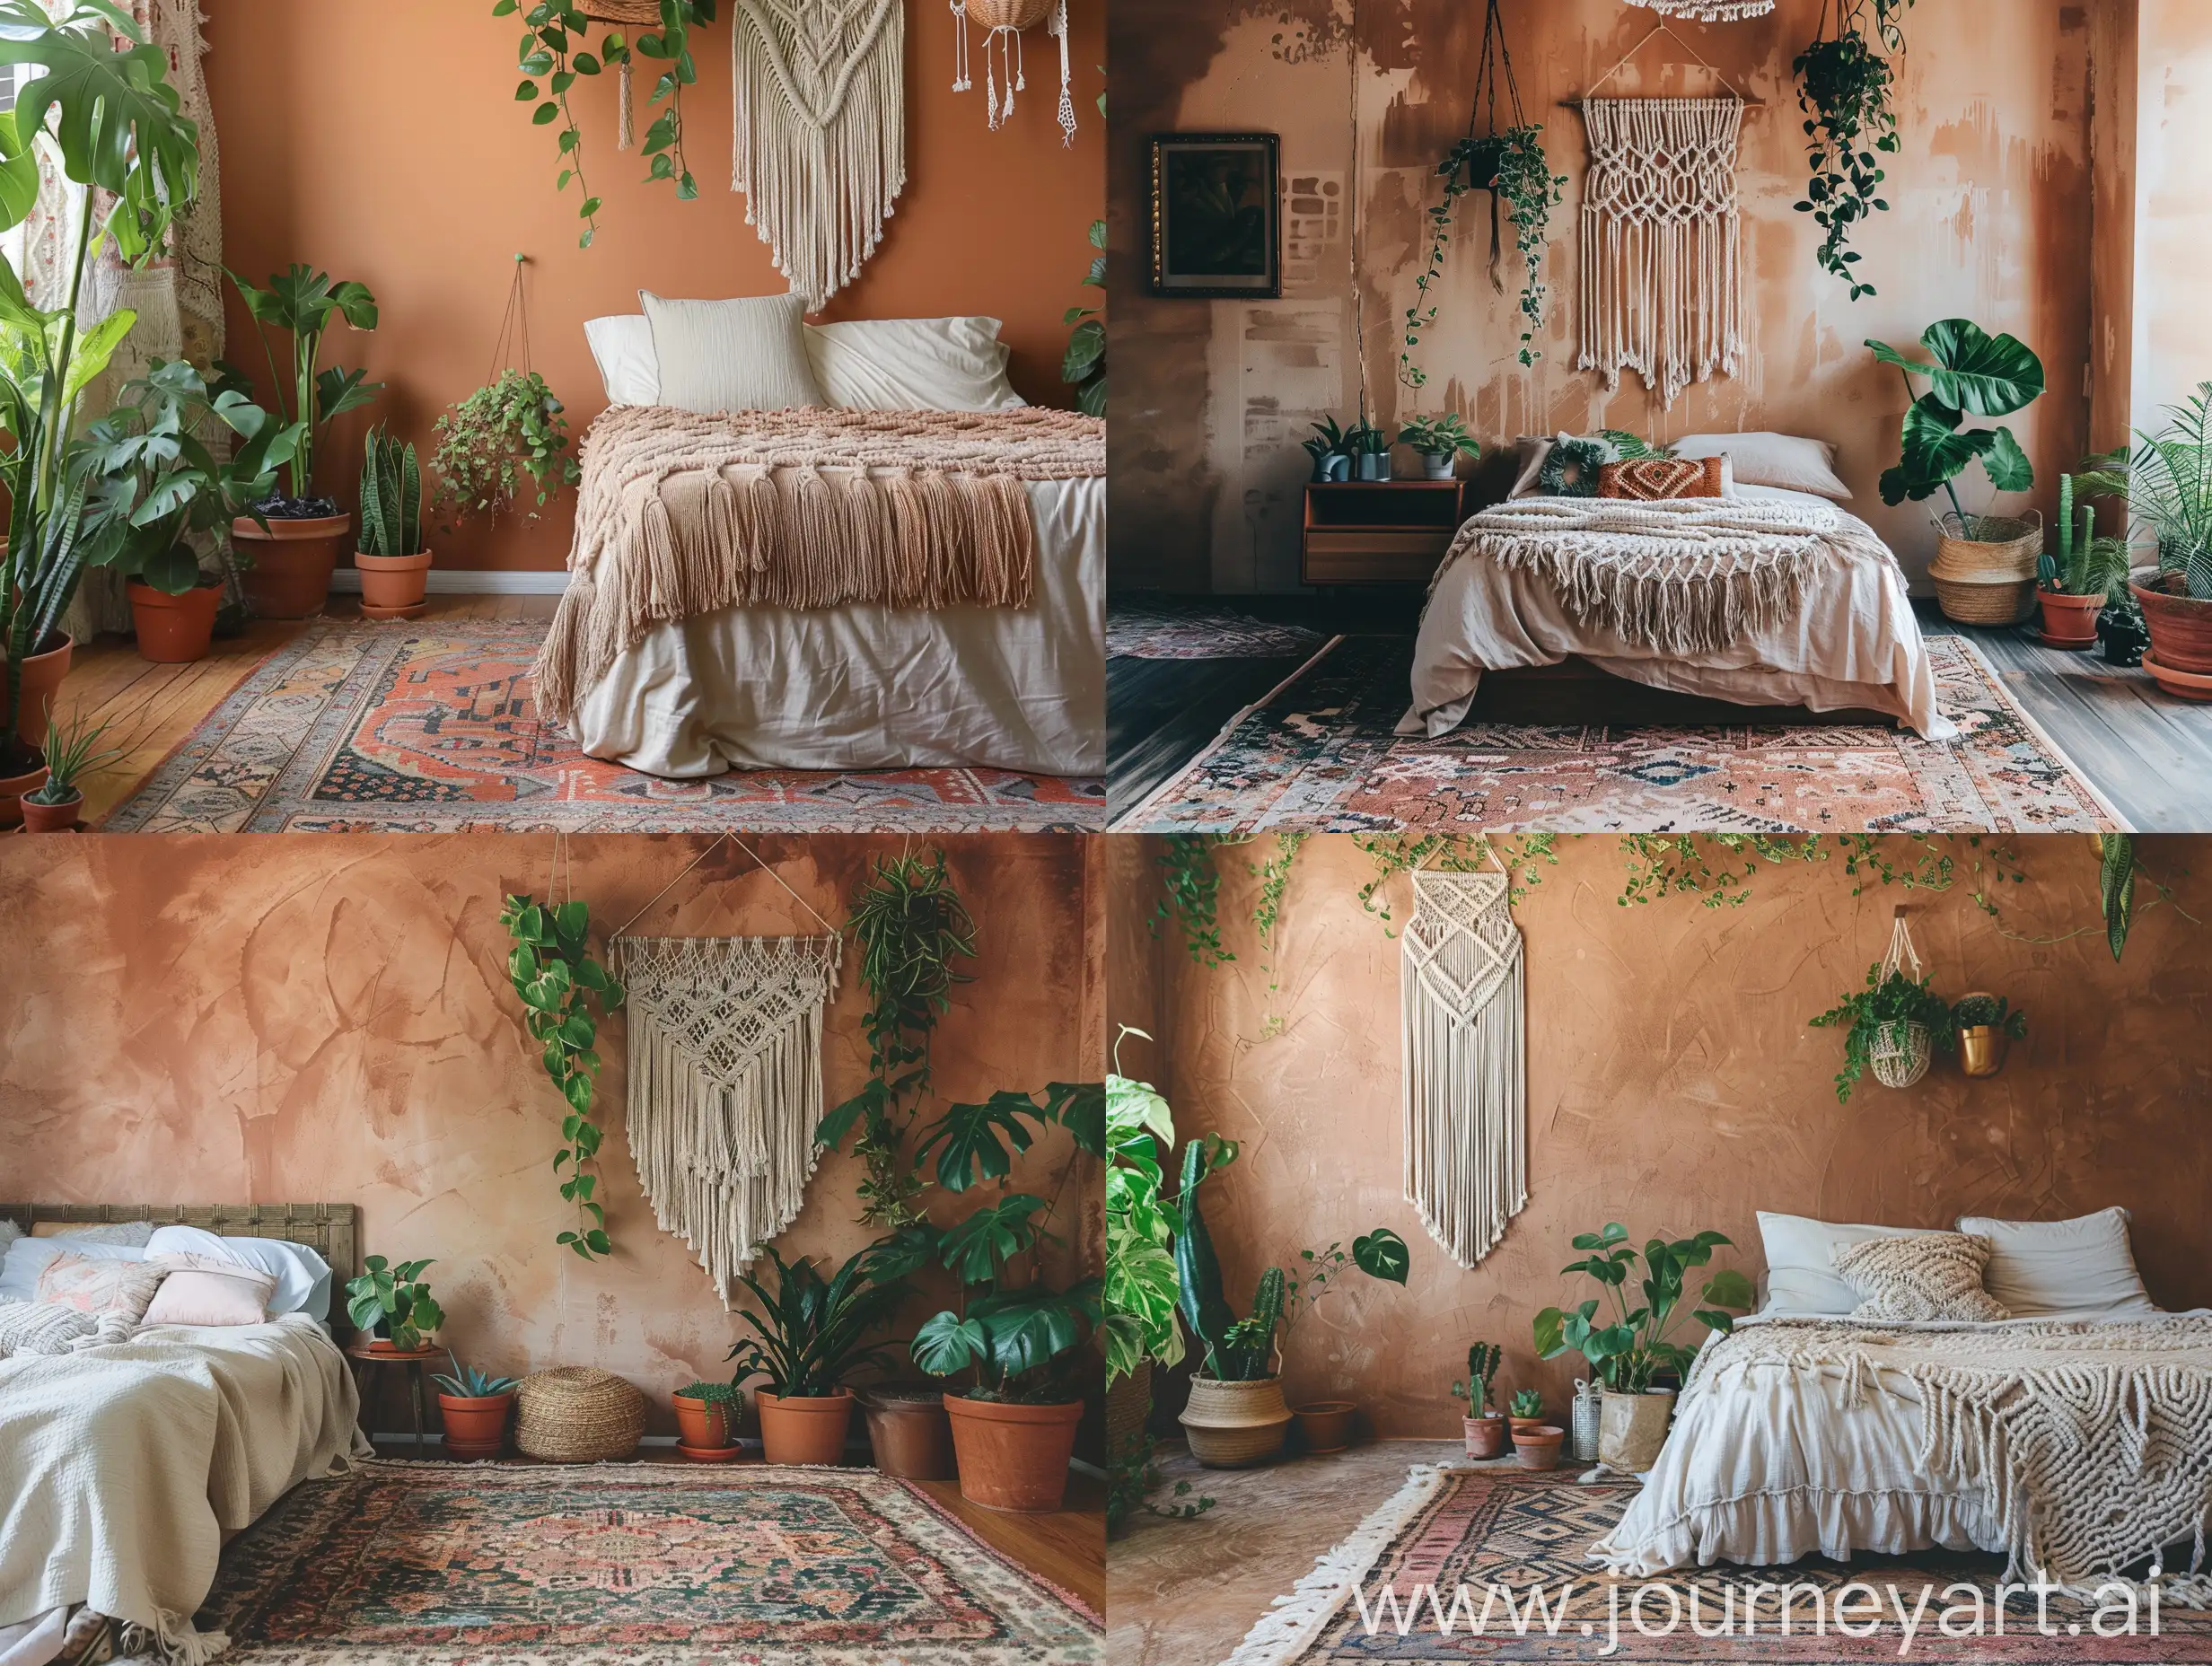 Cozy-Bedroom-Decor-with-Macrame-Hanging-and-Vintage-Rug